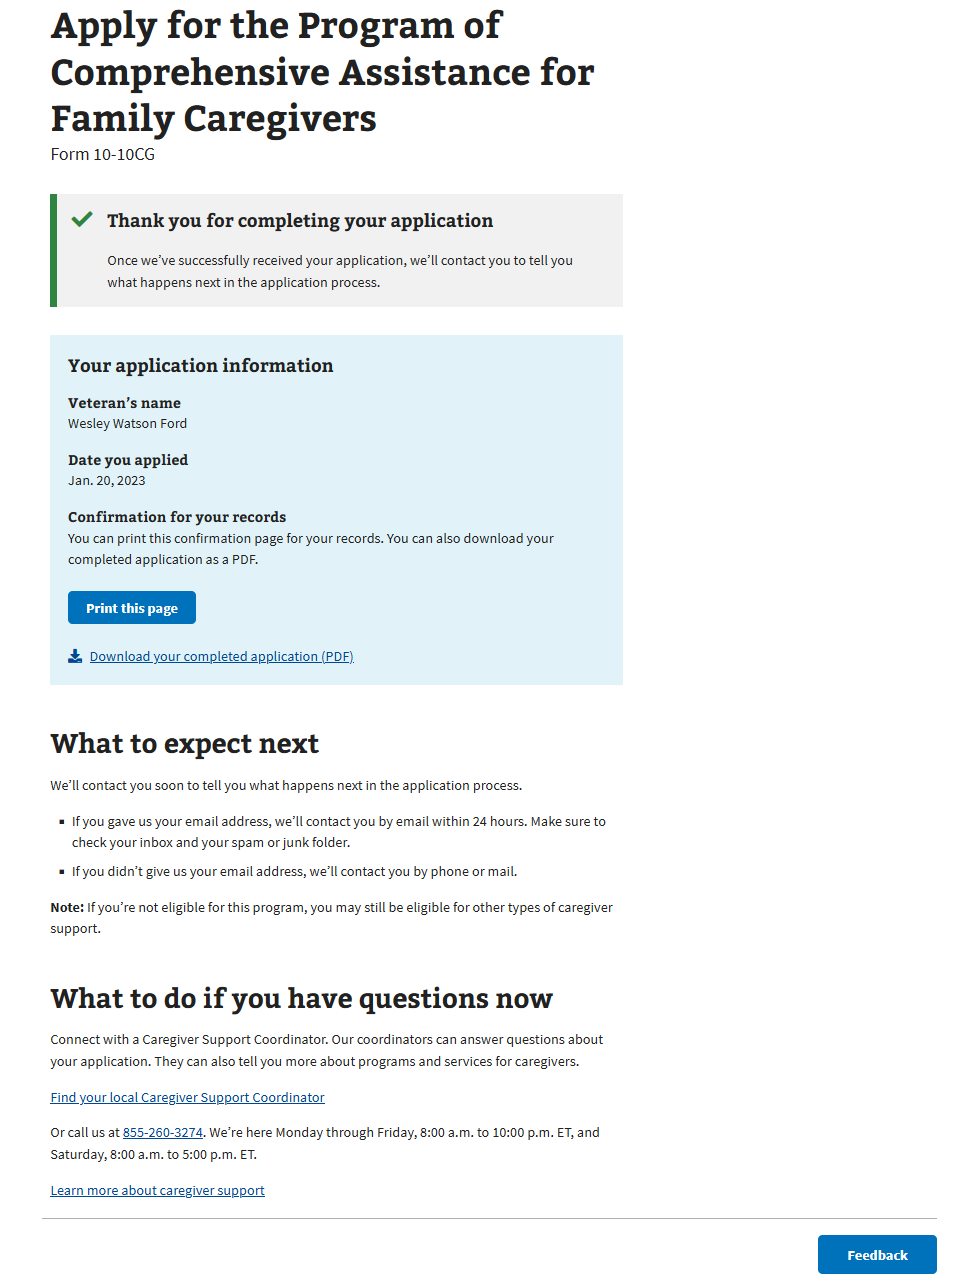 An example confirmation page containing a component that allows users to print the confirmation page.